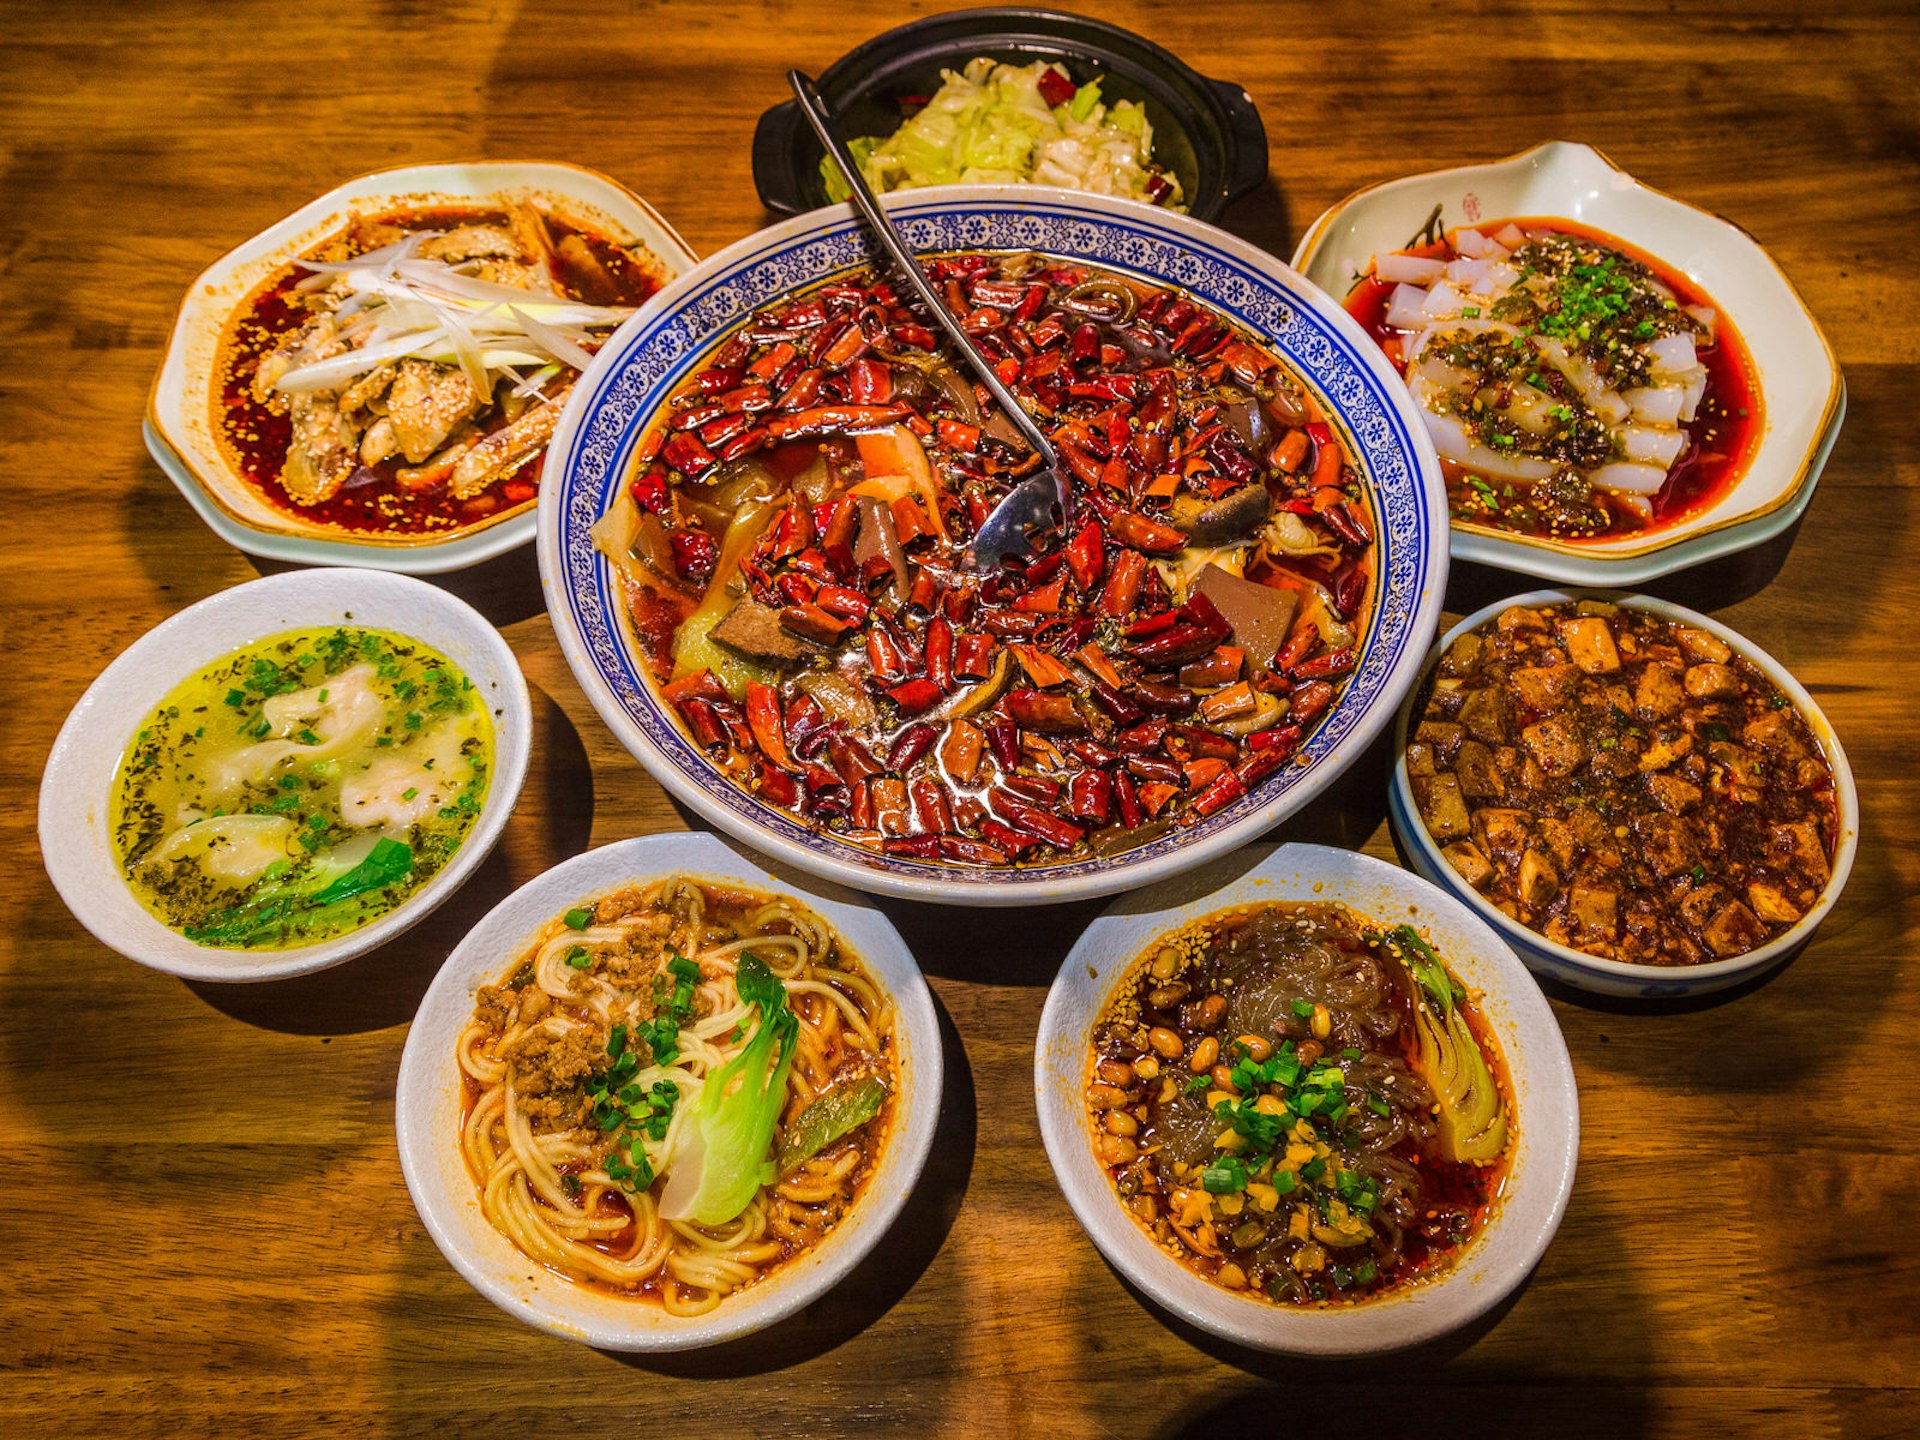 Bowls of different Sichuan foods, including a bowl of red chilli peppers in the middle, and some bowls of noodles. Sichuan is known for its spicy, tongue-numbing peppercorns and chillis © HelloRF Zcool / Shutterstock